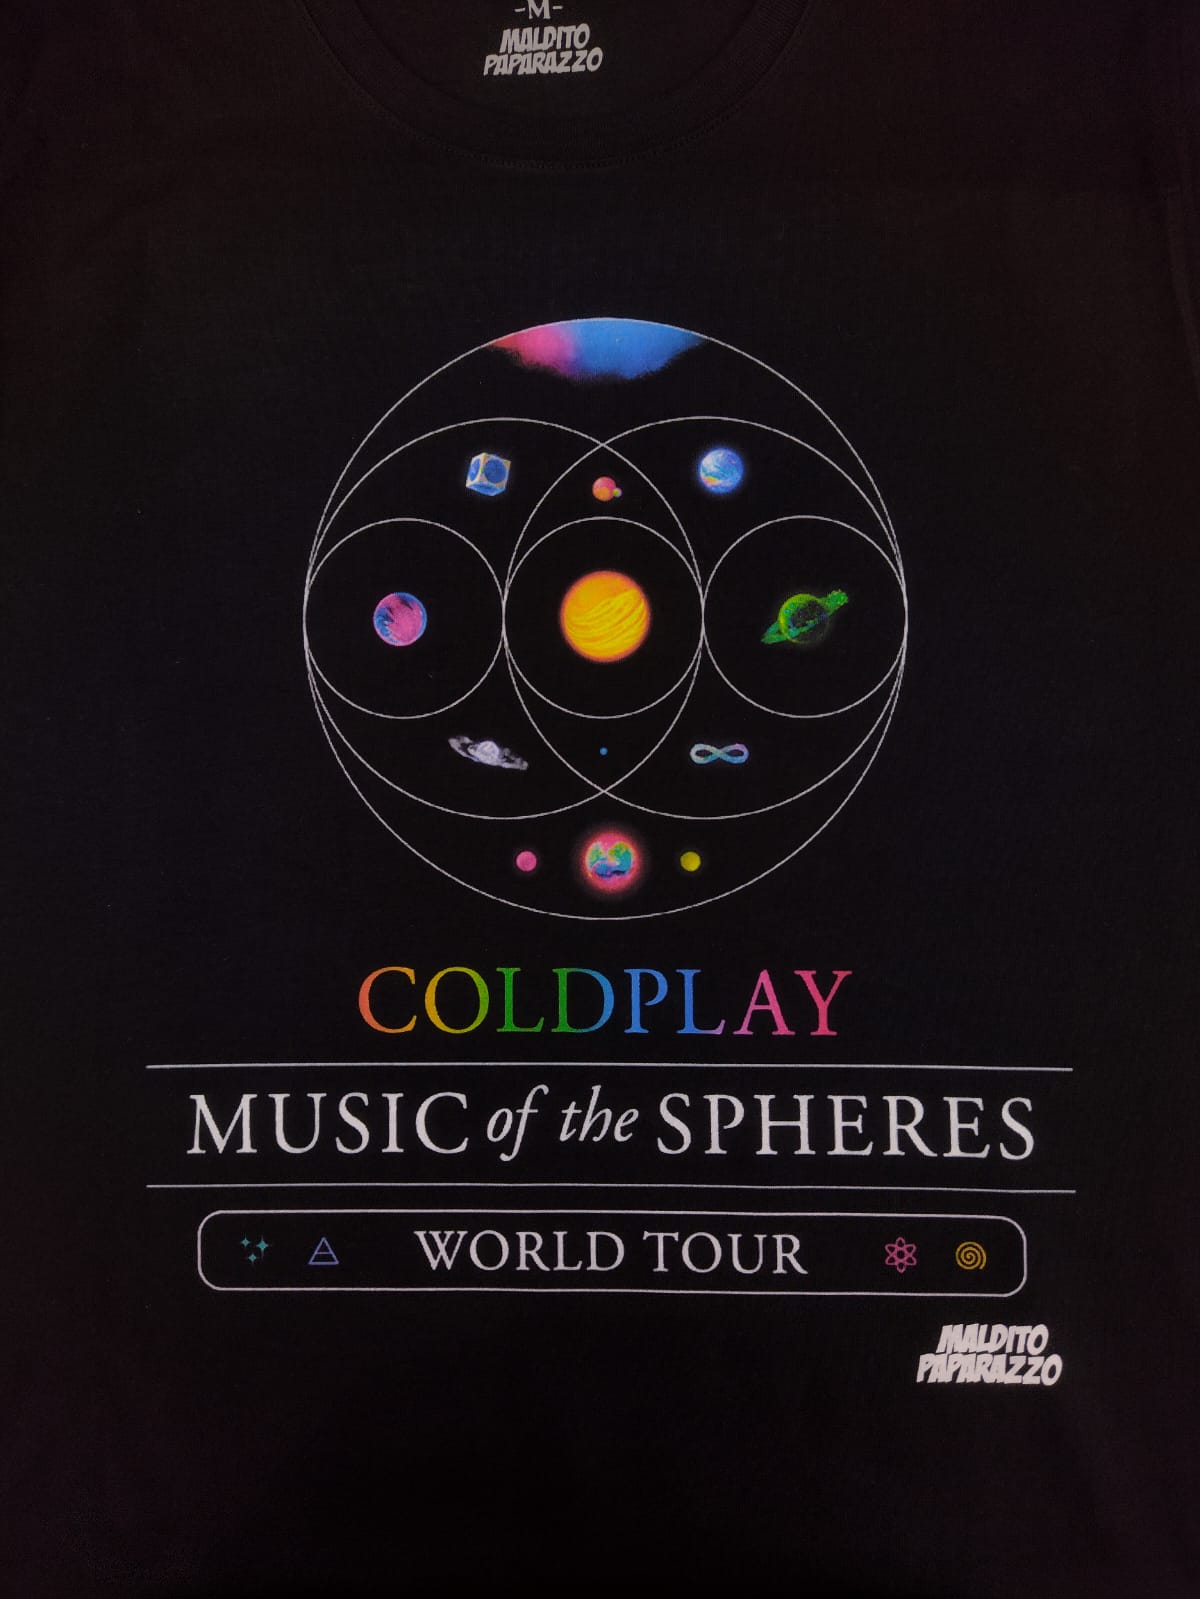 Coldplay Music of the Spheres Tour POSTER Maldito Paparazzo